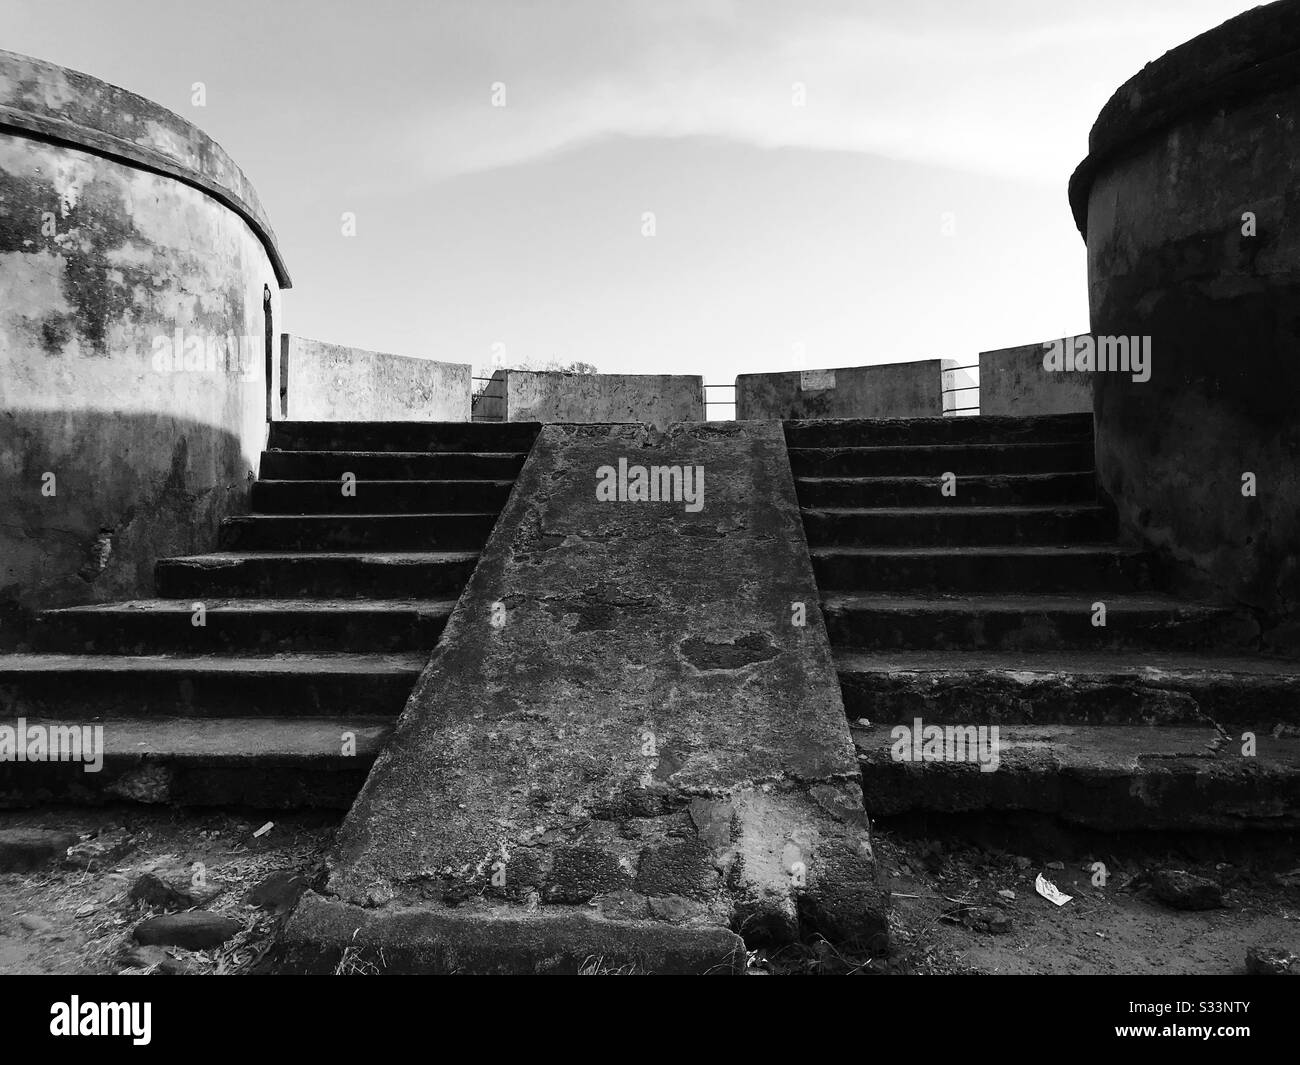 A partial view of fort with steps- Palakkad Tipu Sultan fort situated in the heart of Palakkad - ancient times used this area for monitoring enemy intruders-  it’s a tourist destination- black & white Stock Photo